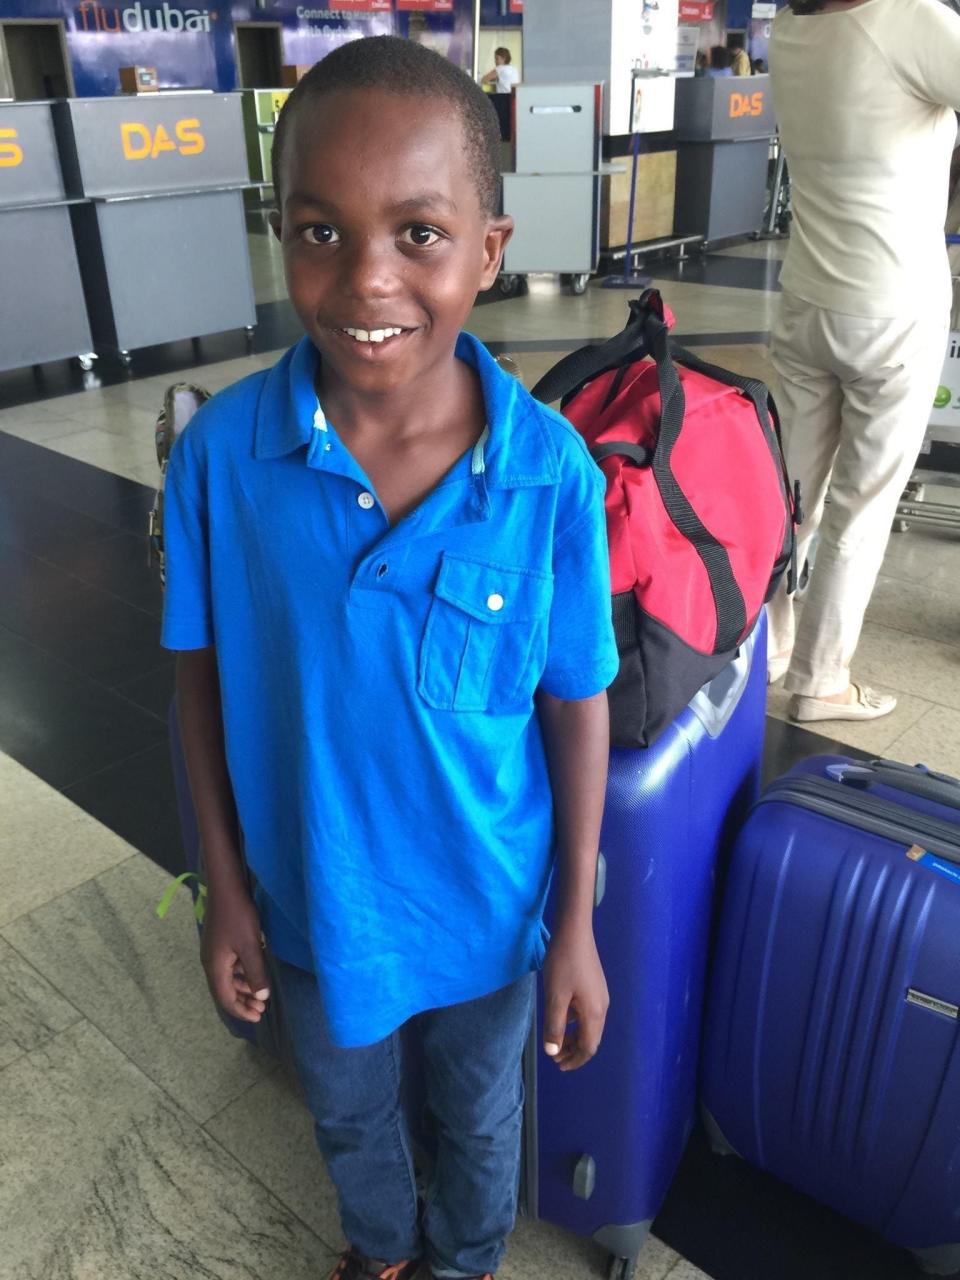 The Gerth family brought Charles from Uganda to the United States in 2015 before finalizing his adoption.